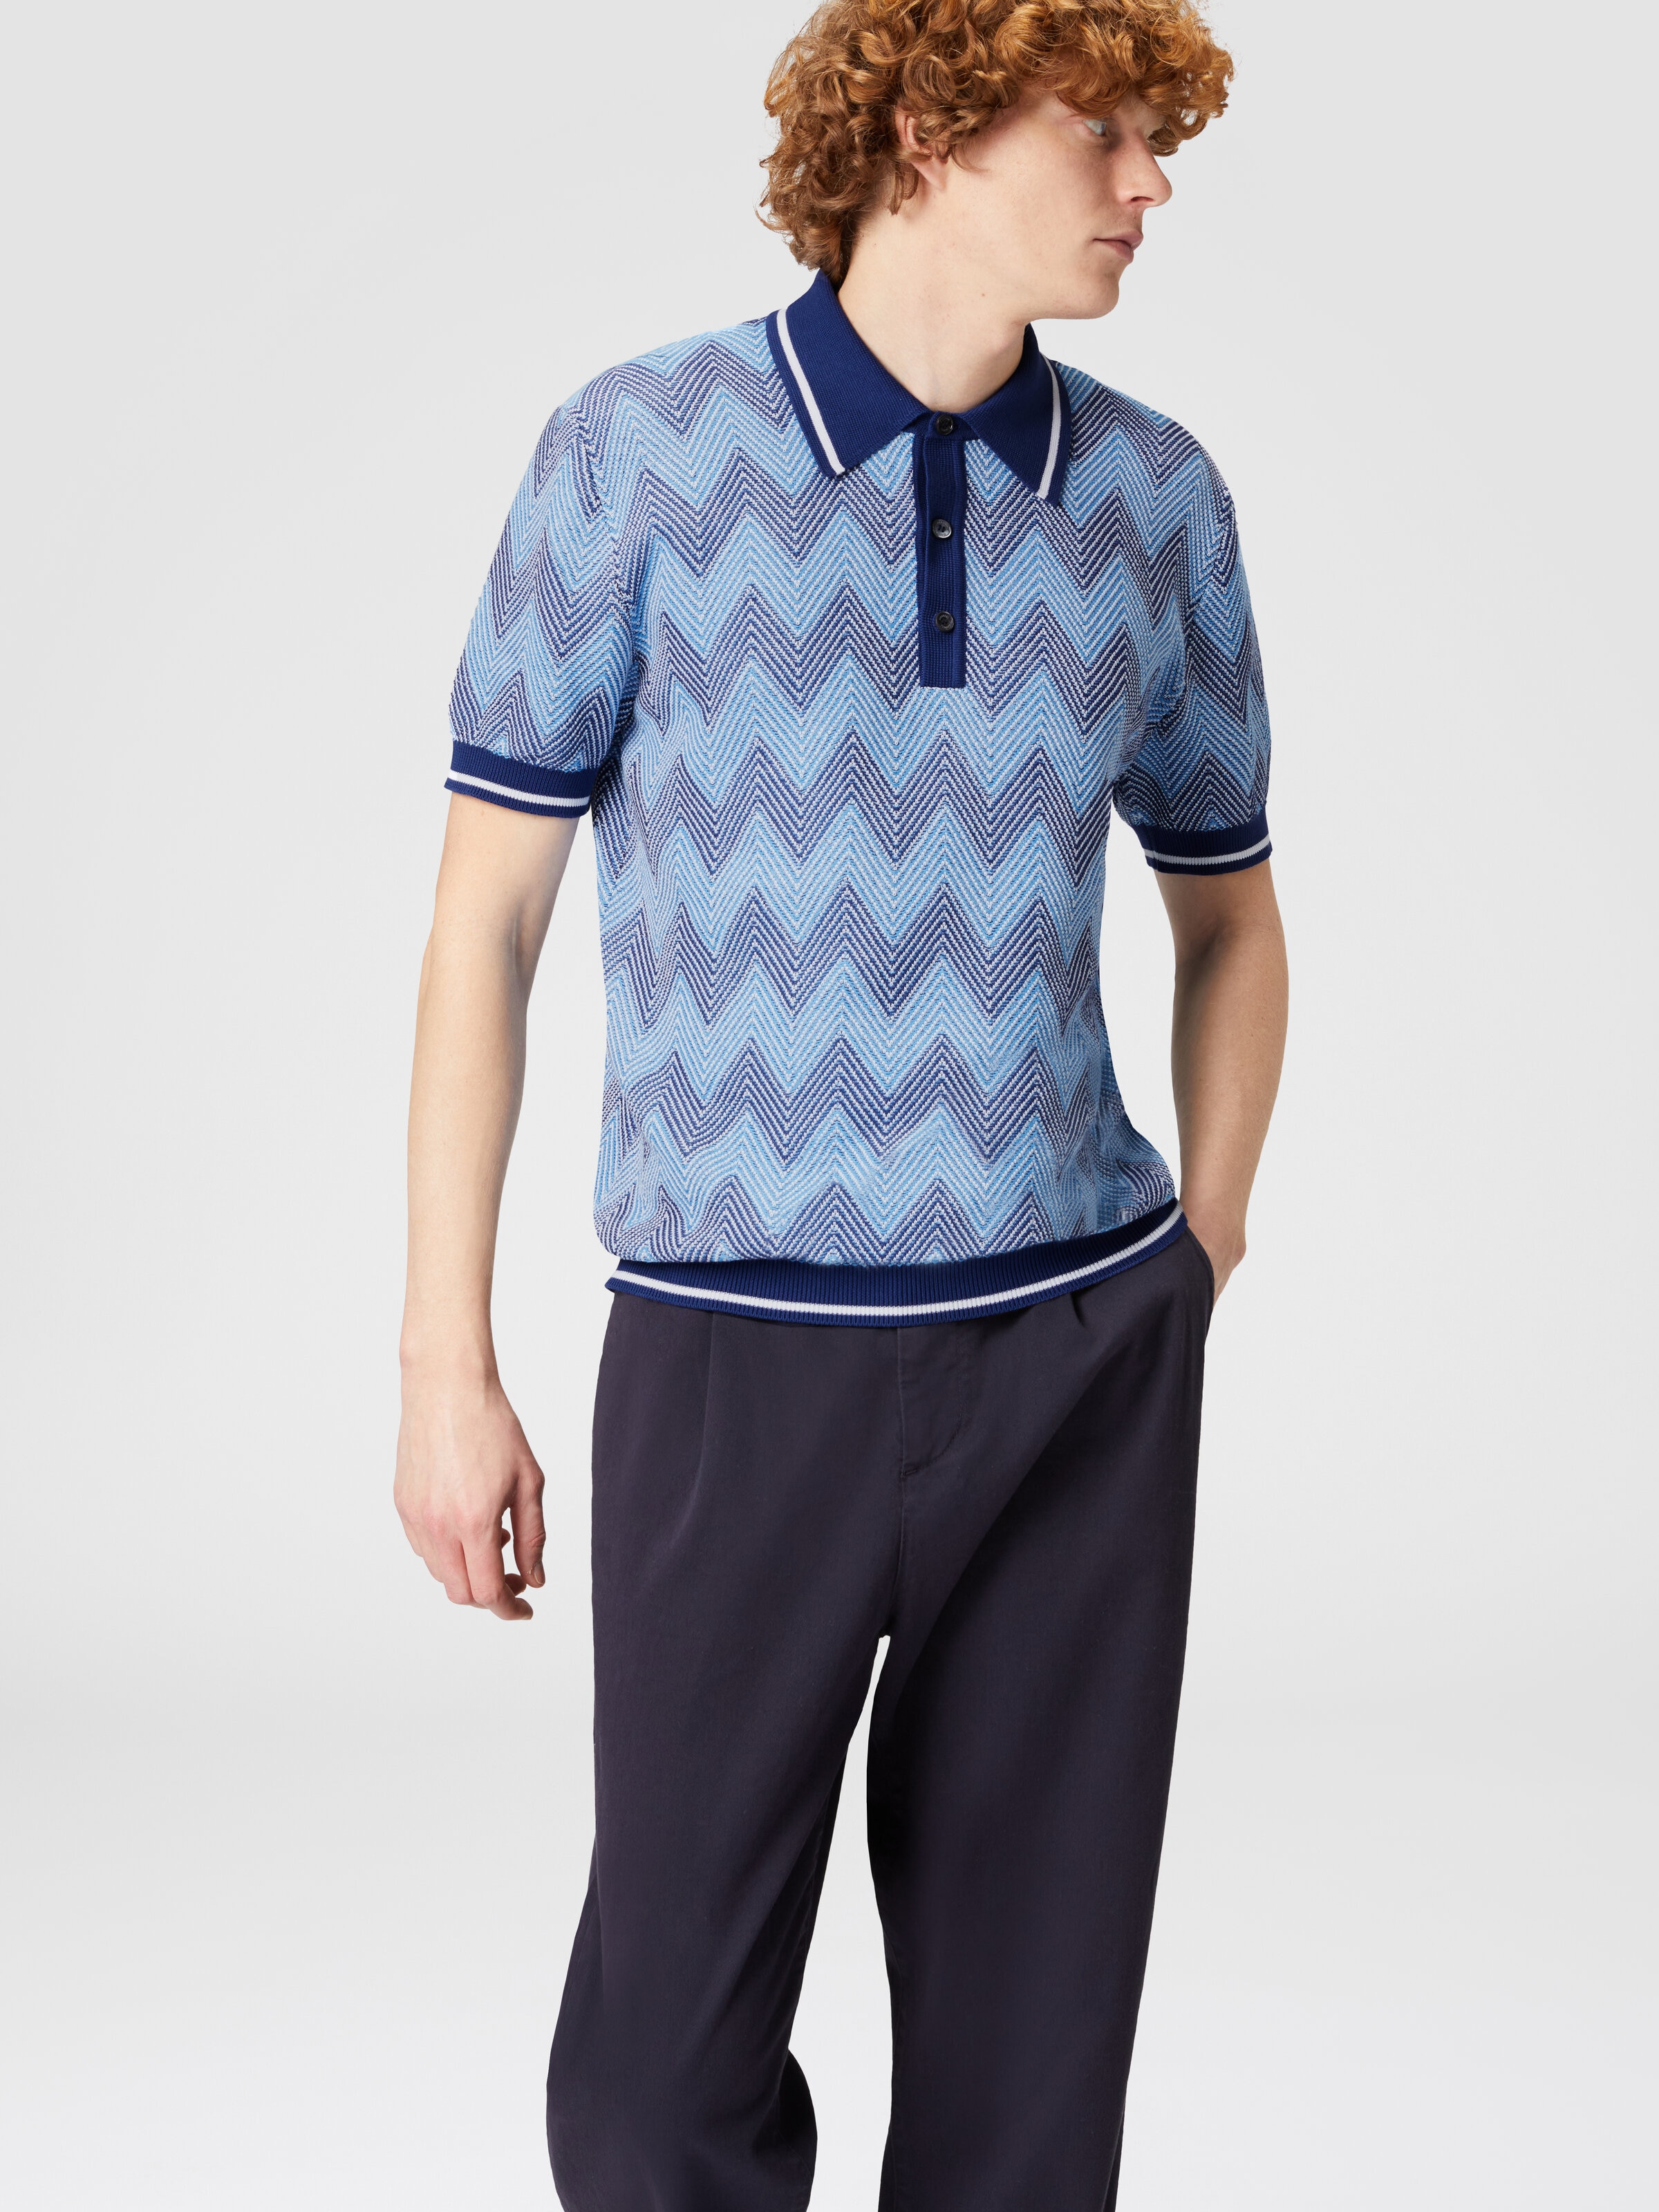 Short-sleeved polo shirt in zigzag cotton with contrasting trim, Blue - 3